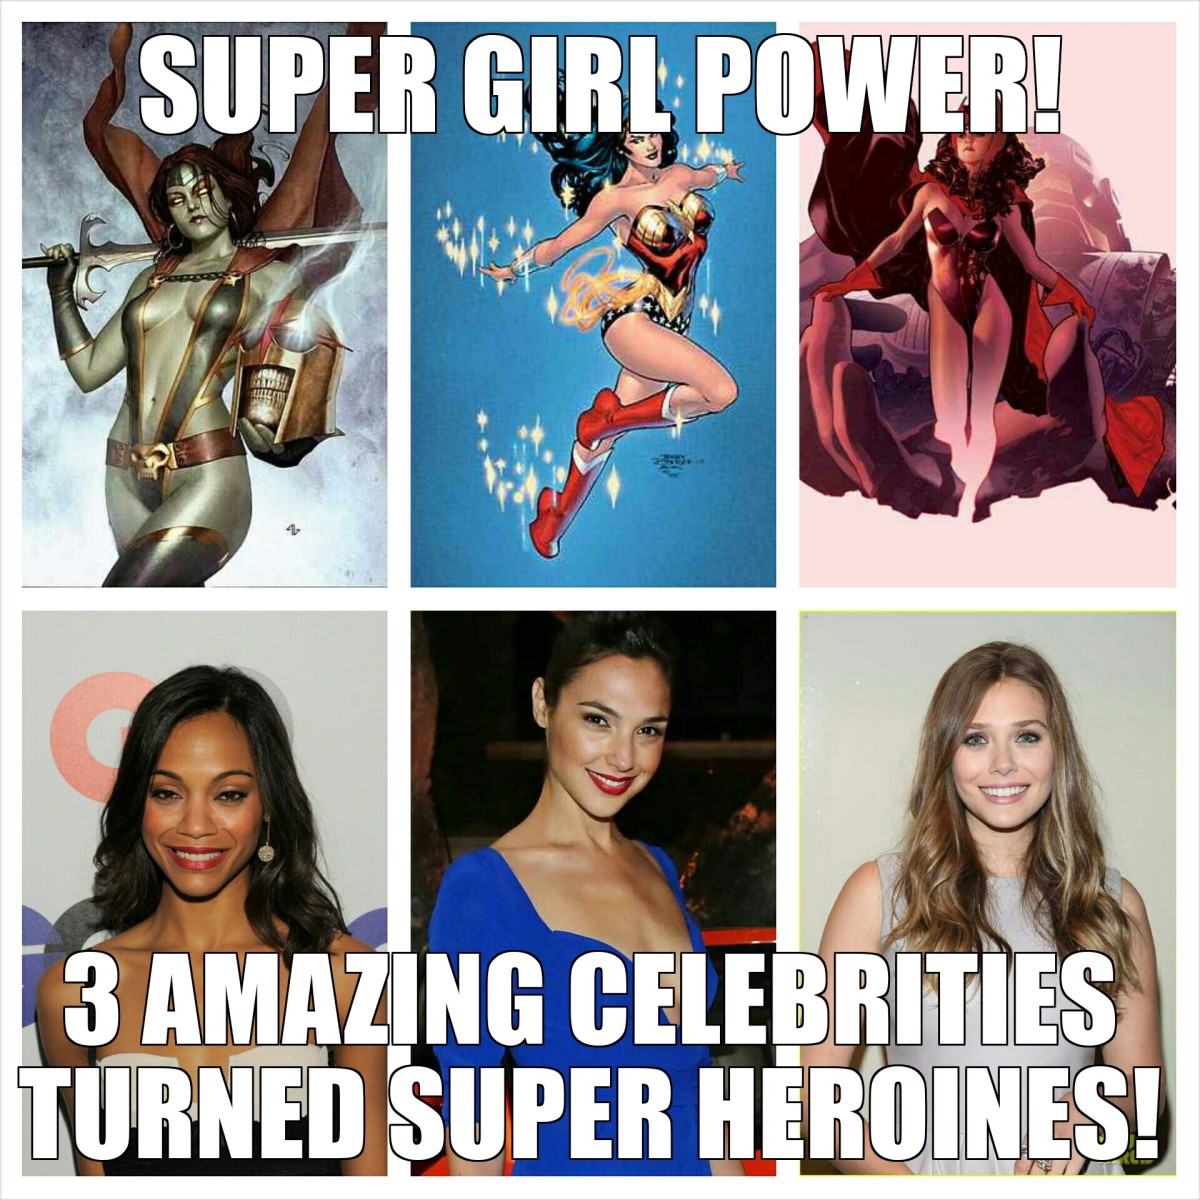 “Super Girl Power! Three Amazing Celebrities Turned Super Heroines coming to a theater near you!